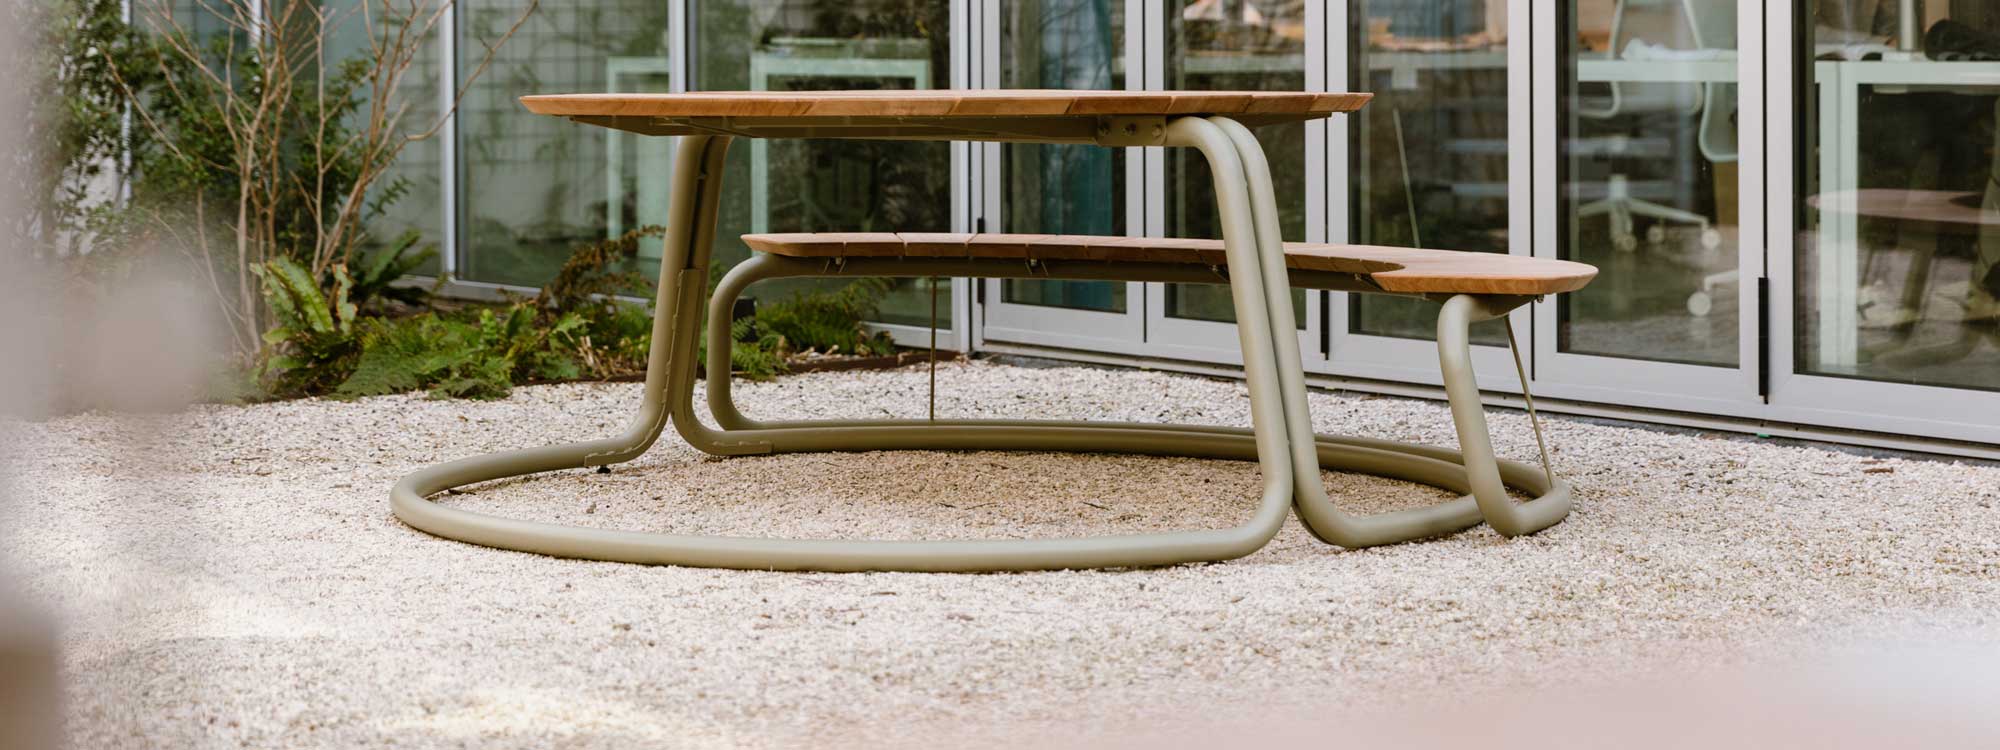 Image of Wünder's The Circle circular picnic table and benches in tubular stainless steel and sustainable afzelia wood